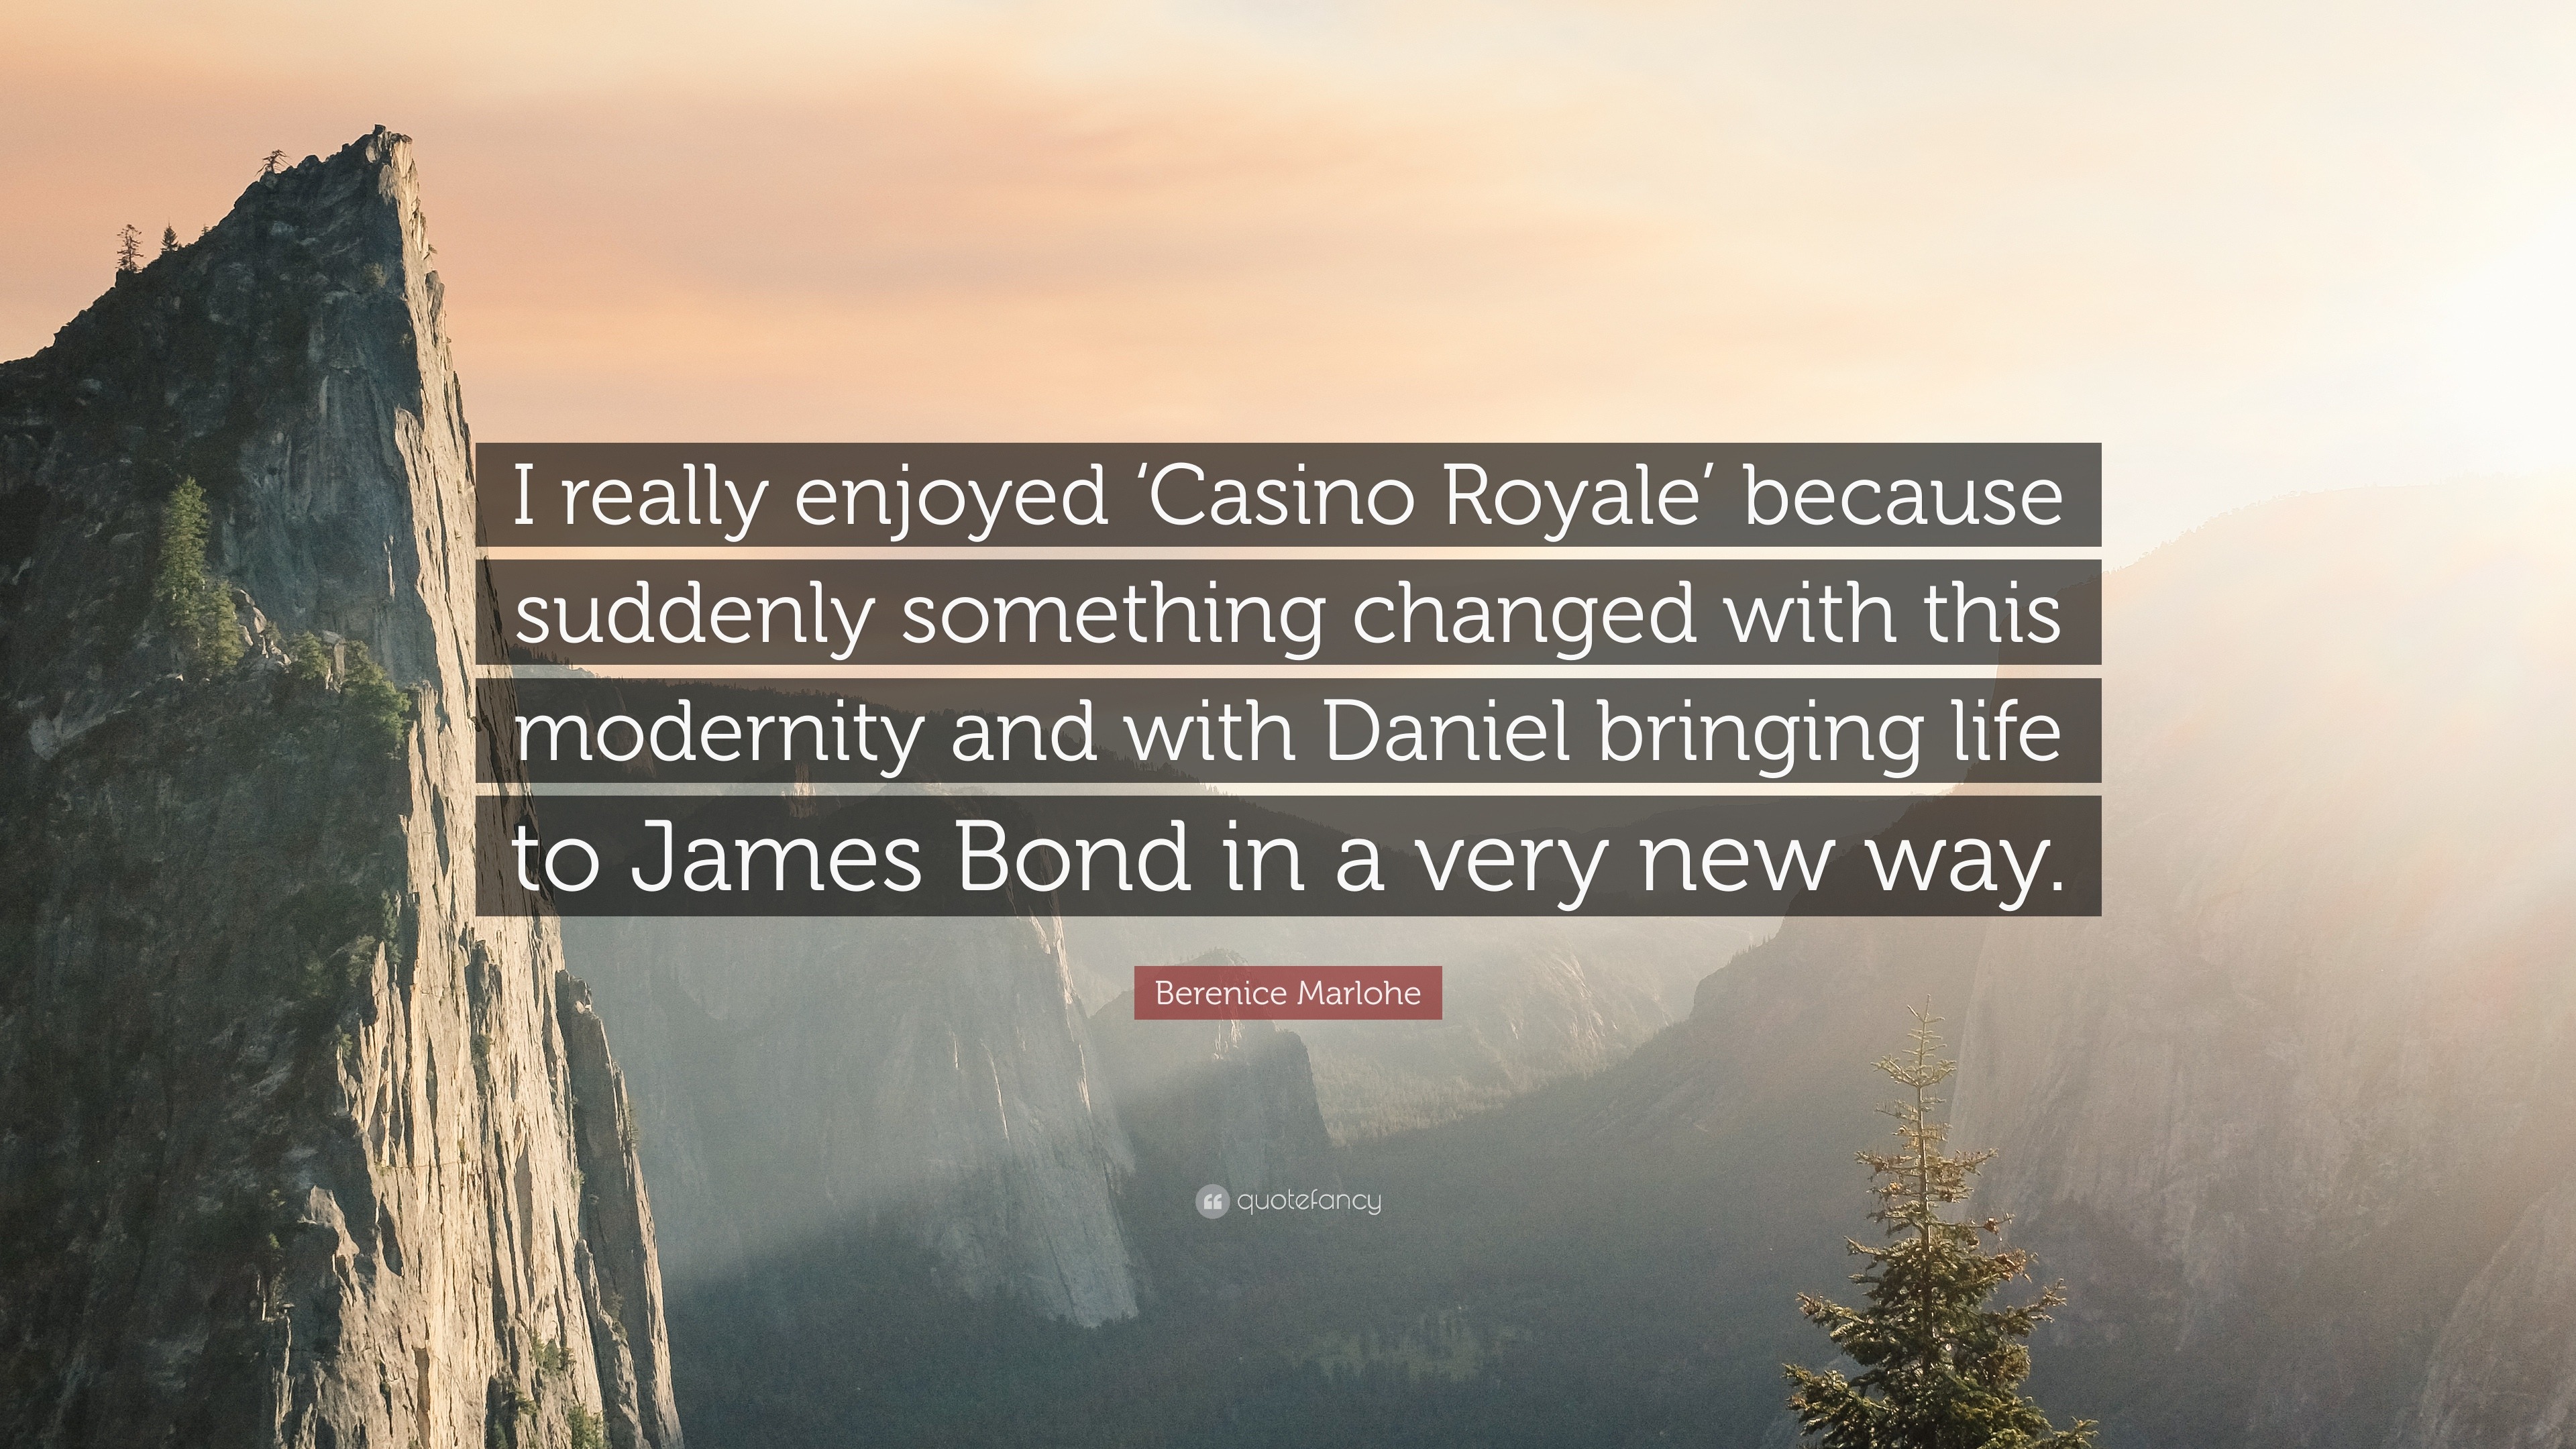 casino royale quotes bangs villains wife